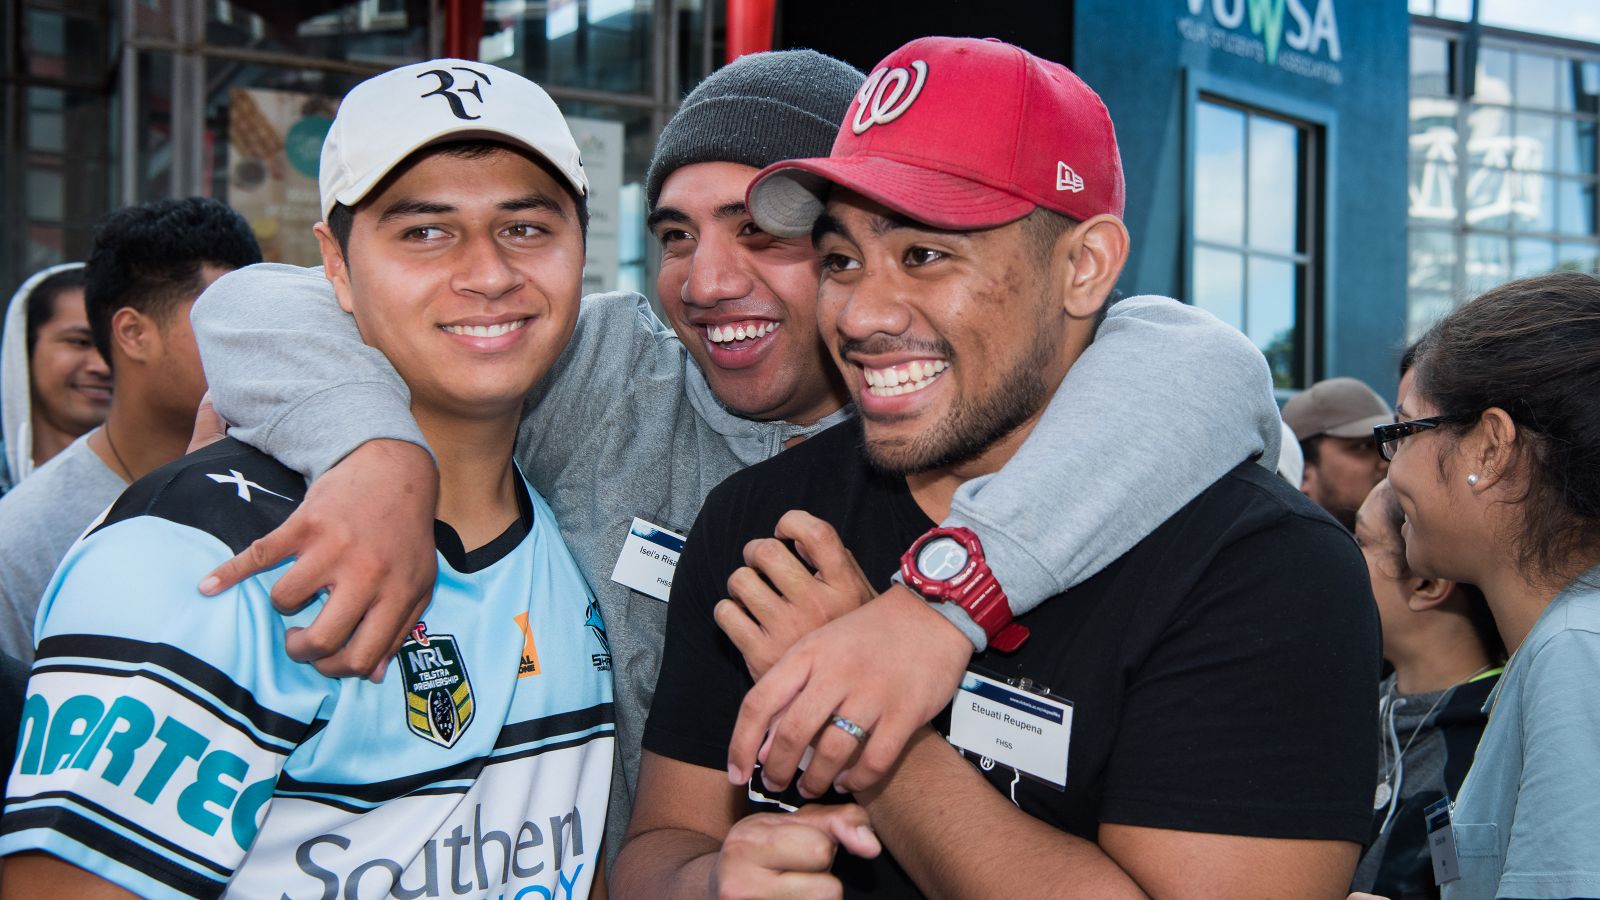 Pasifika camp – brotherhood three male students smile together for a photo.